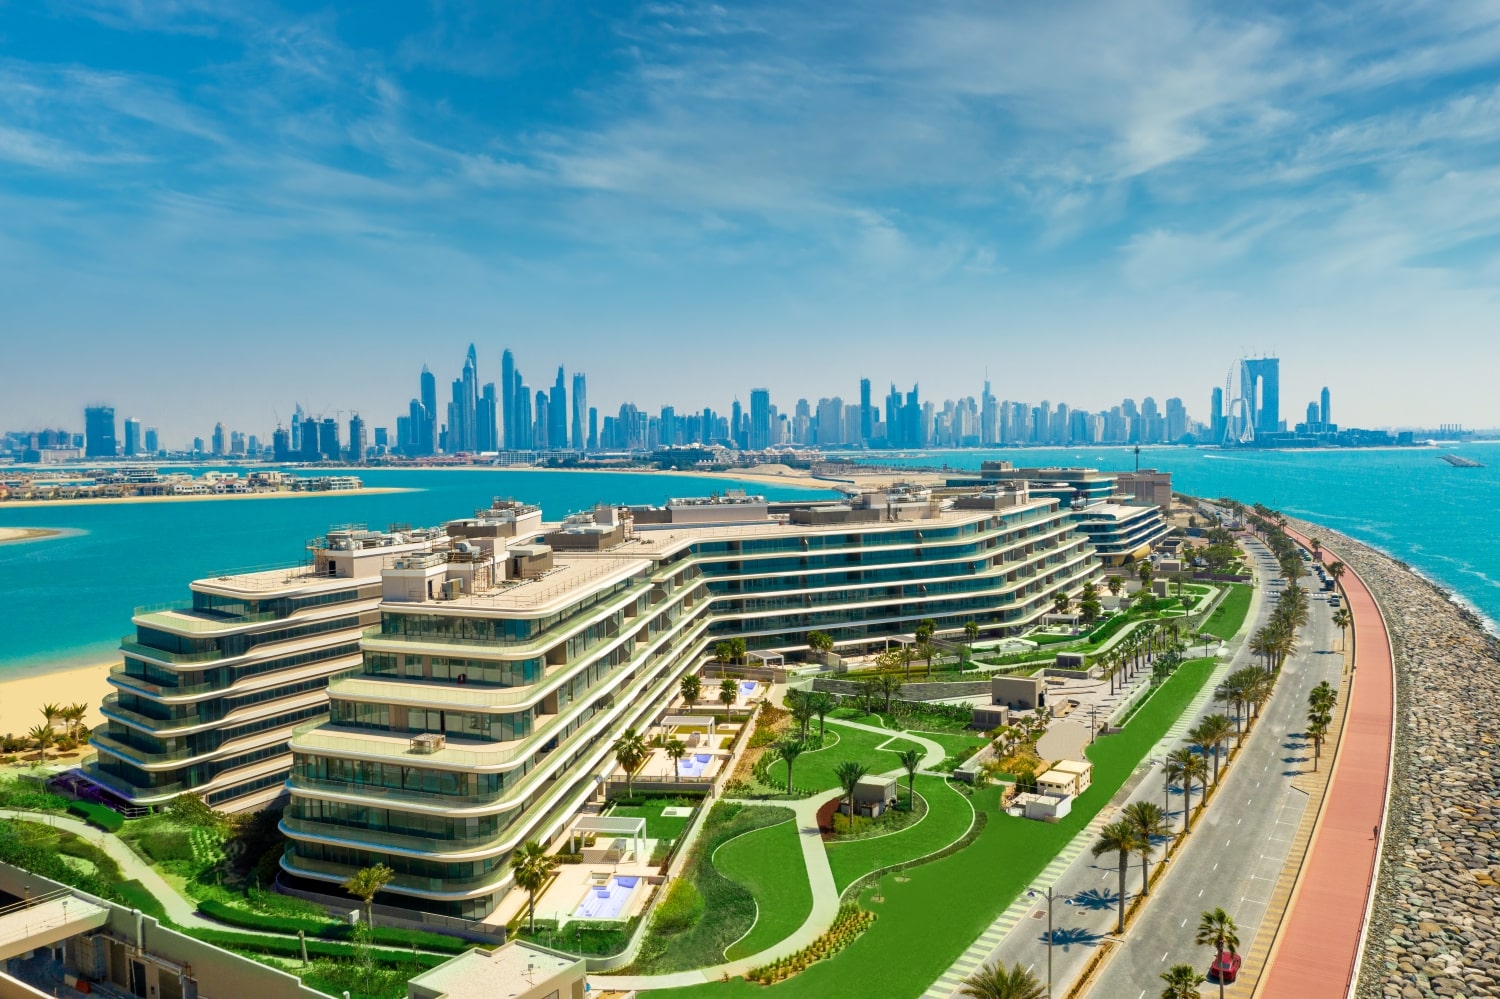 Dubai within the Top 3 Destination for Branded Residences